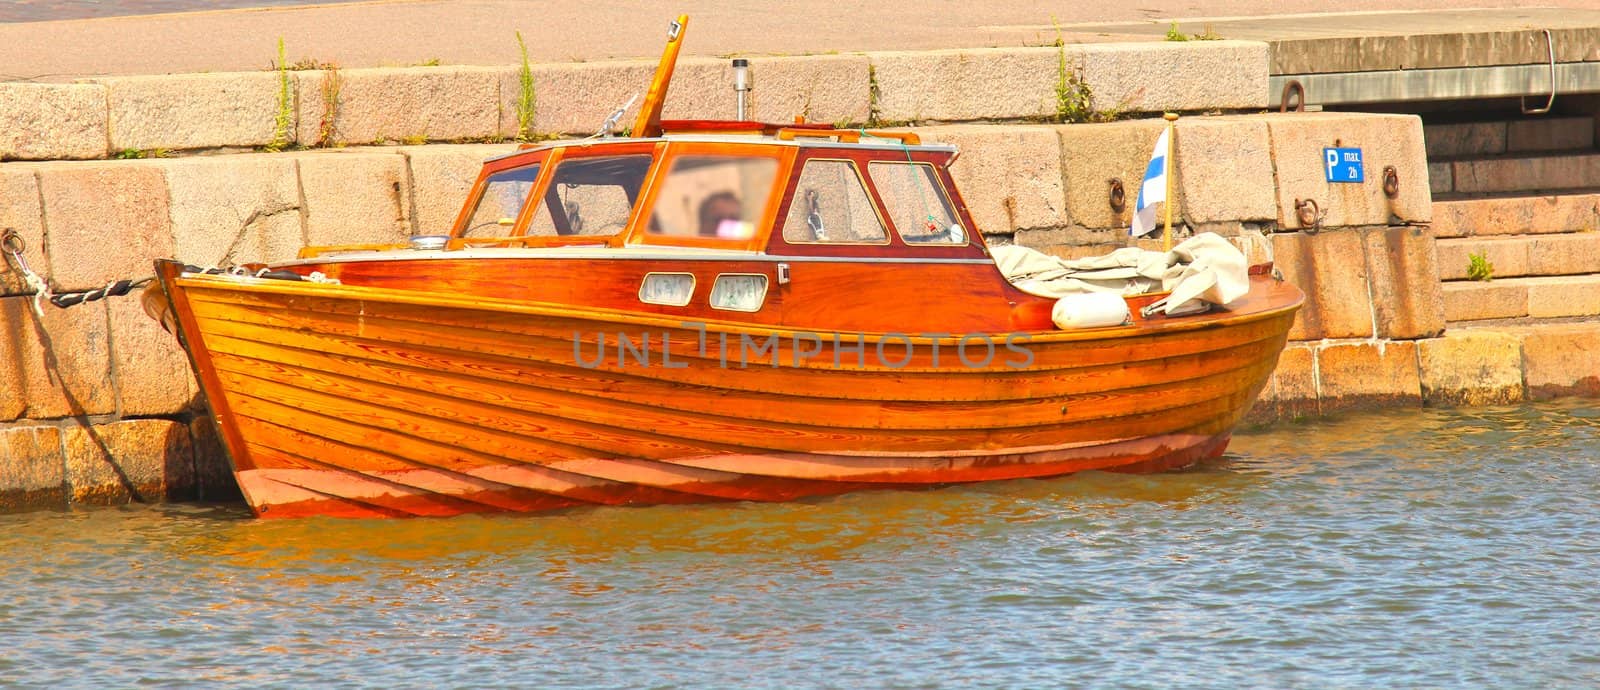 Shiny wooden boat, mooring in water at harbor